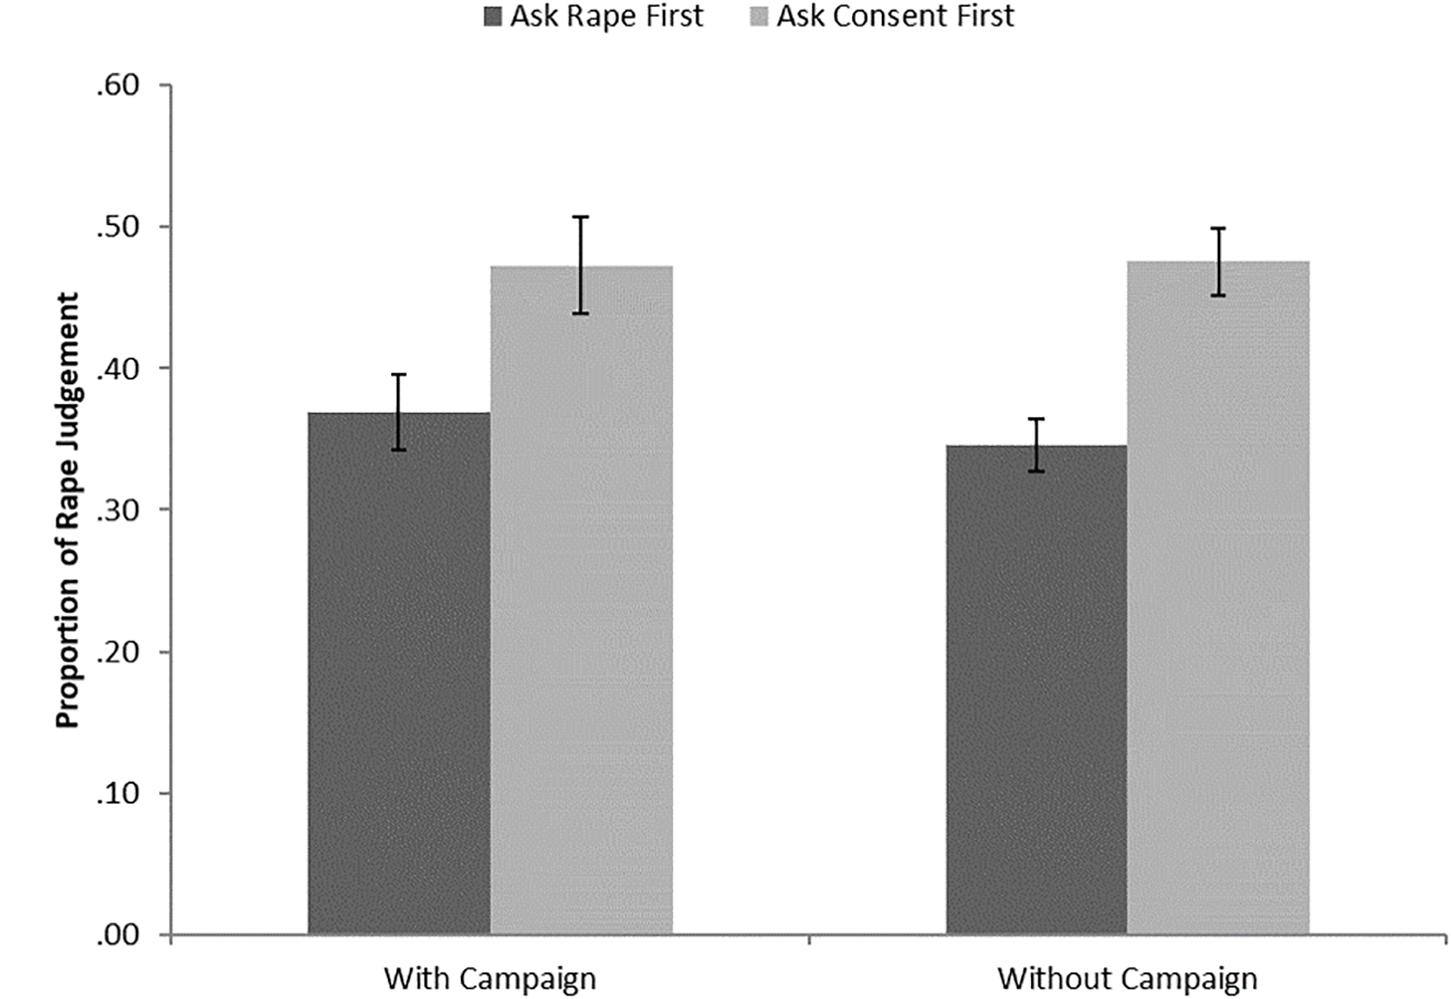 Video Rape Sexy Video - Frontiers | The Effect of Passively Viewing a Consent Campaign Video on  Attitudes Toward Rape